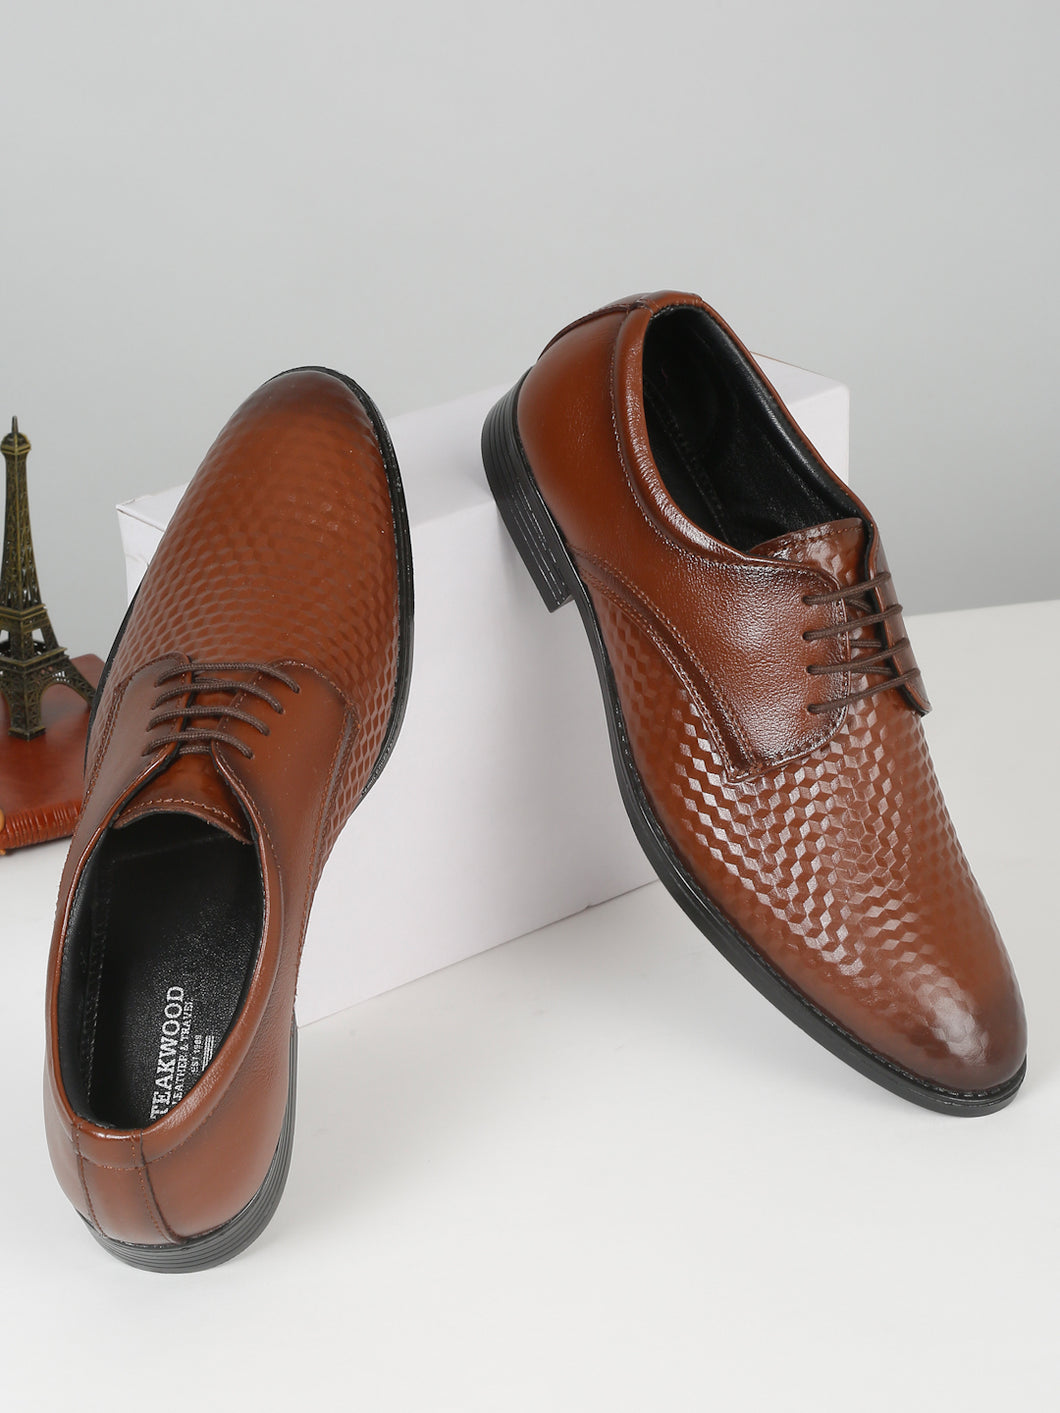 Mens's Brown Patterned Texture Leather Formal Shoes